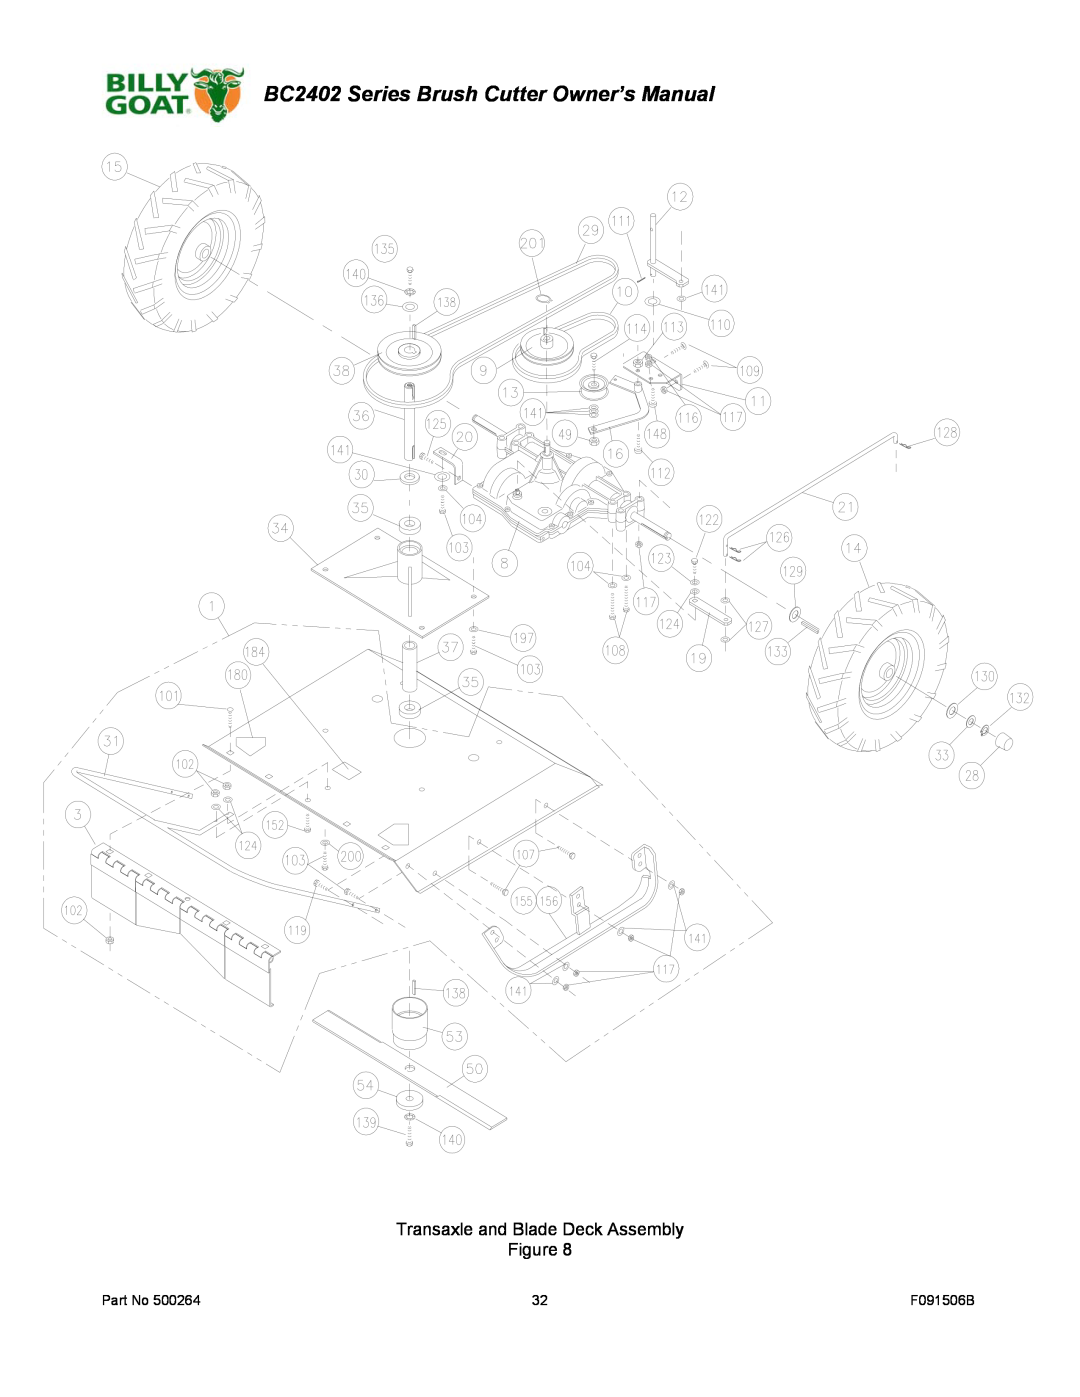 Billy Goat BC2402 owner manual Transaxle and Blade Deck Assembly 